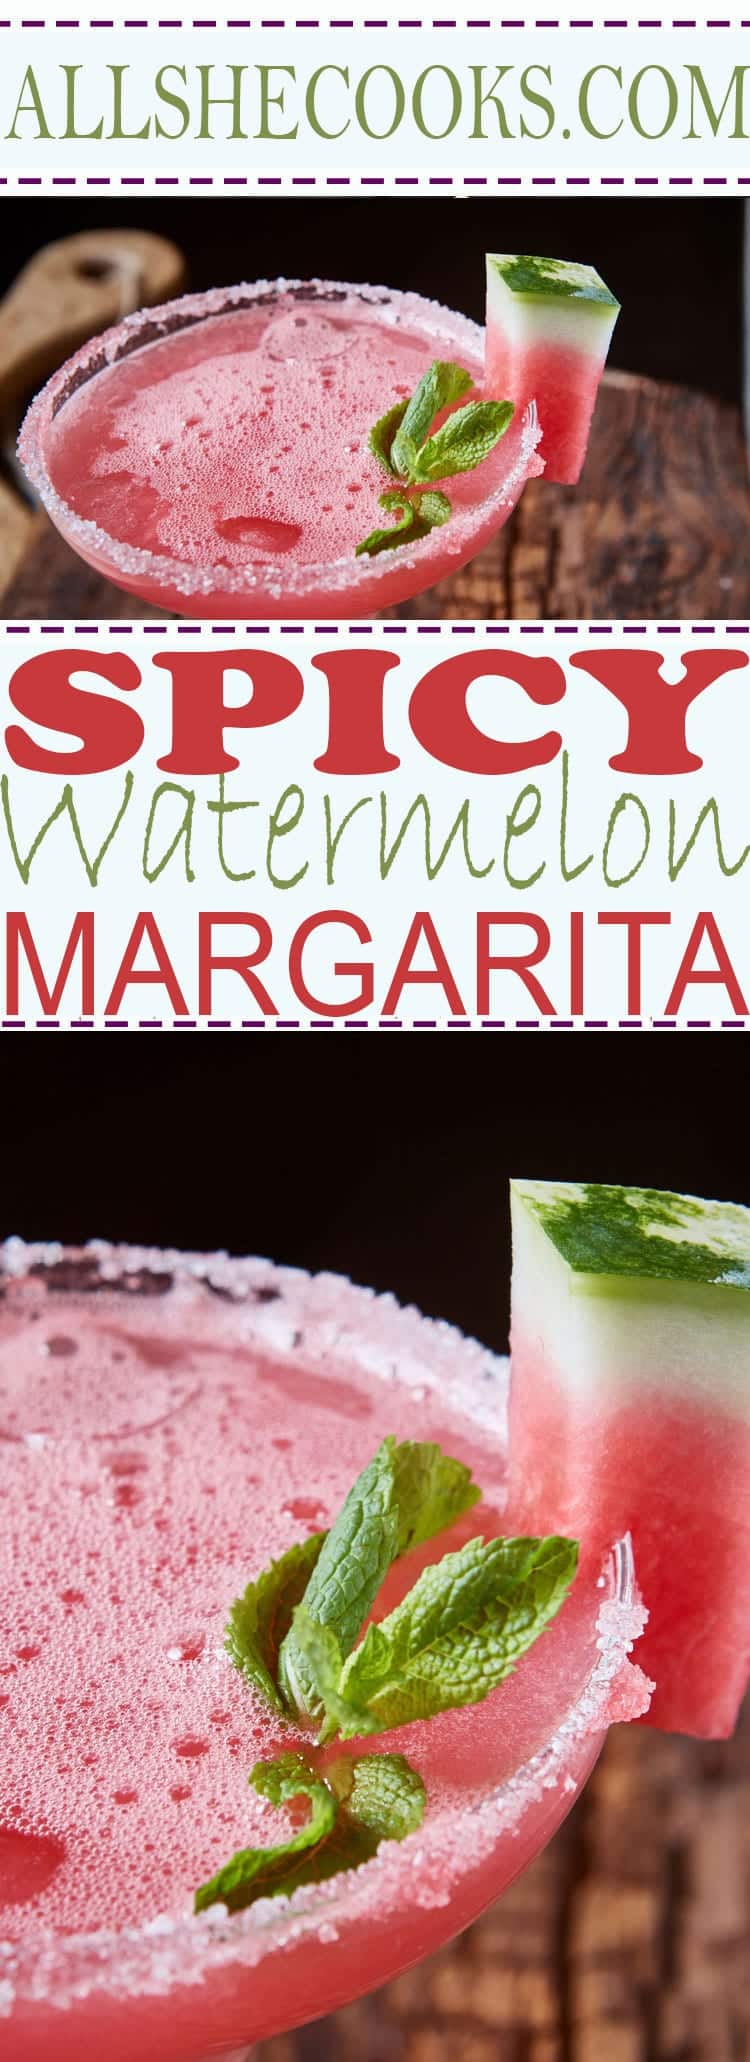 Simple Watermelon Margarita recipe perfect for serving for cocktail hour or for your favorite party drink. This alcoholic drink is a crowd pleaser.